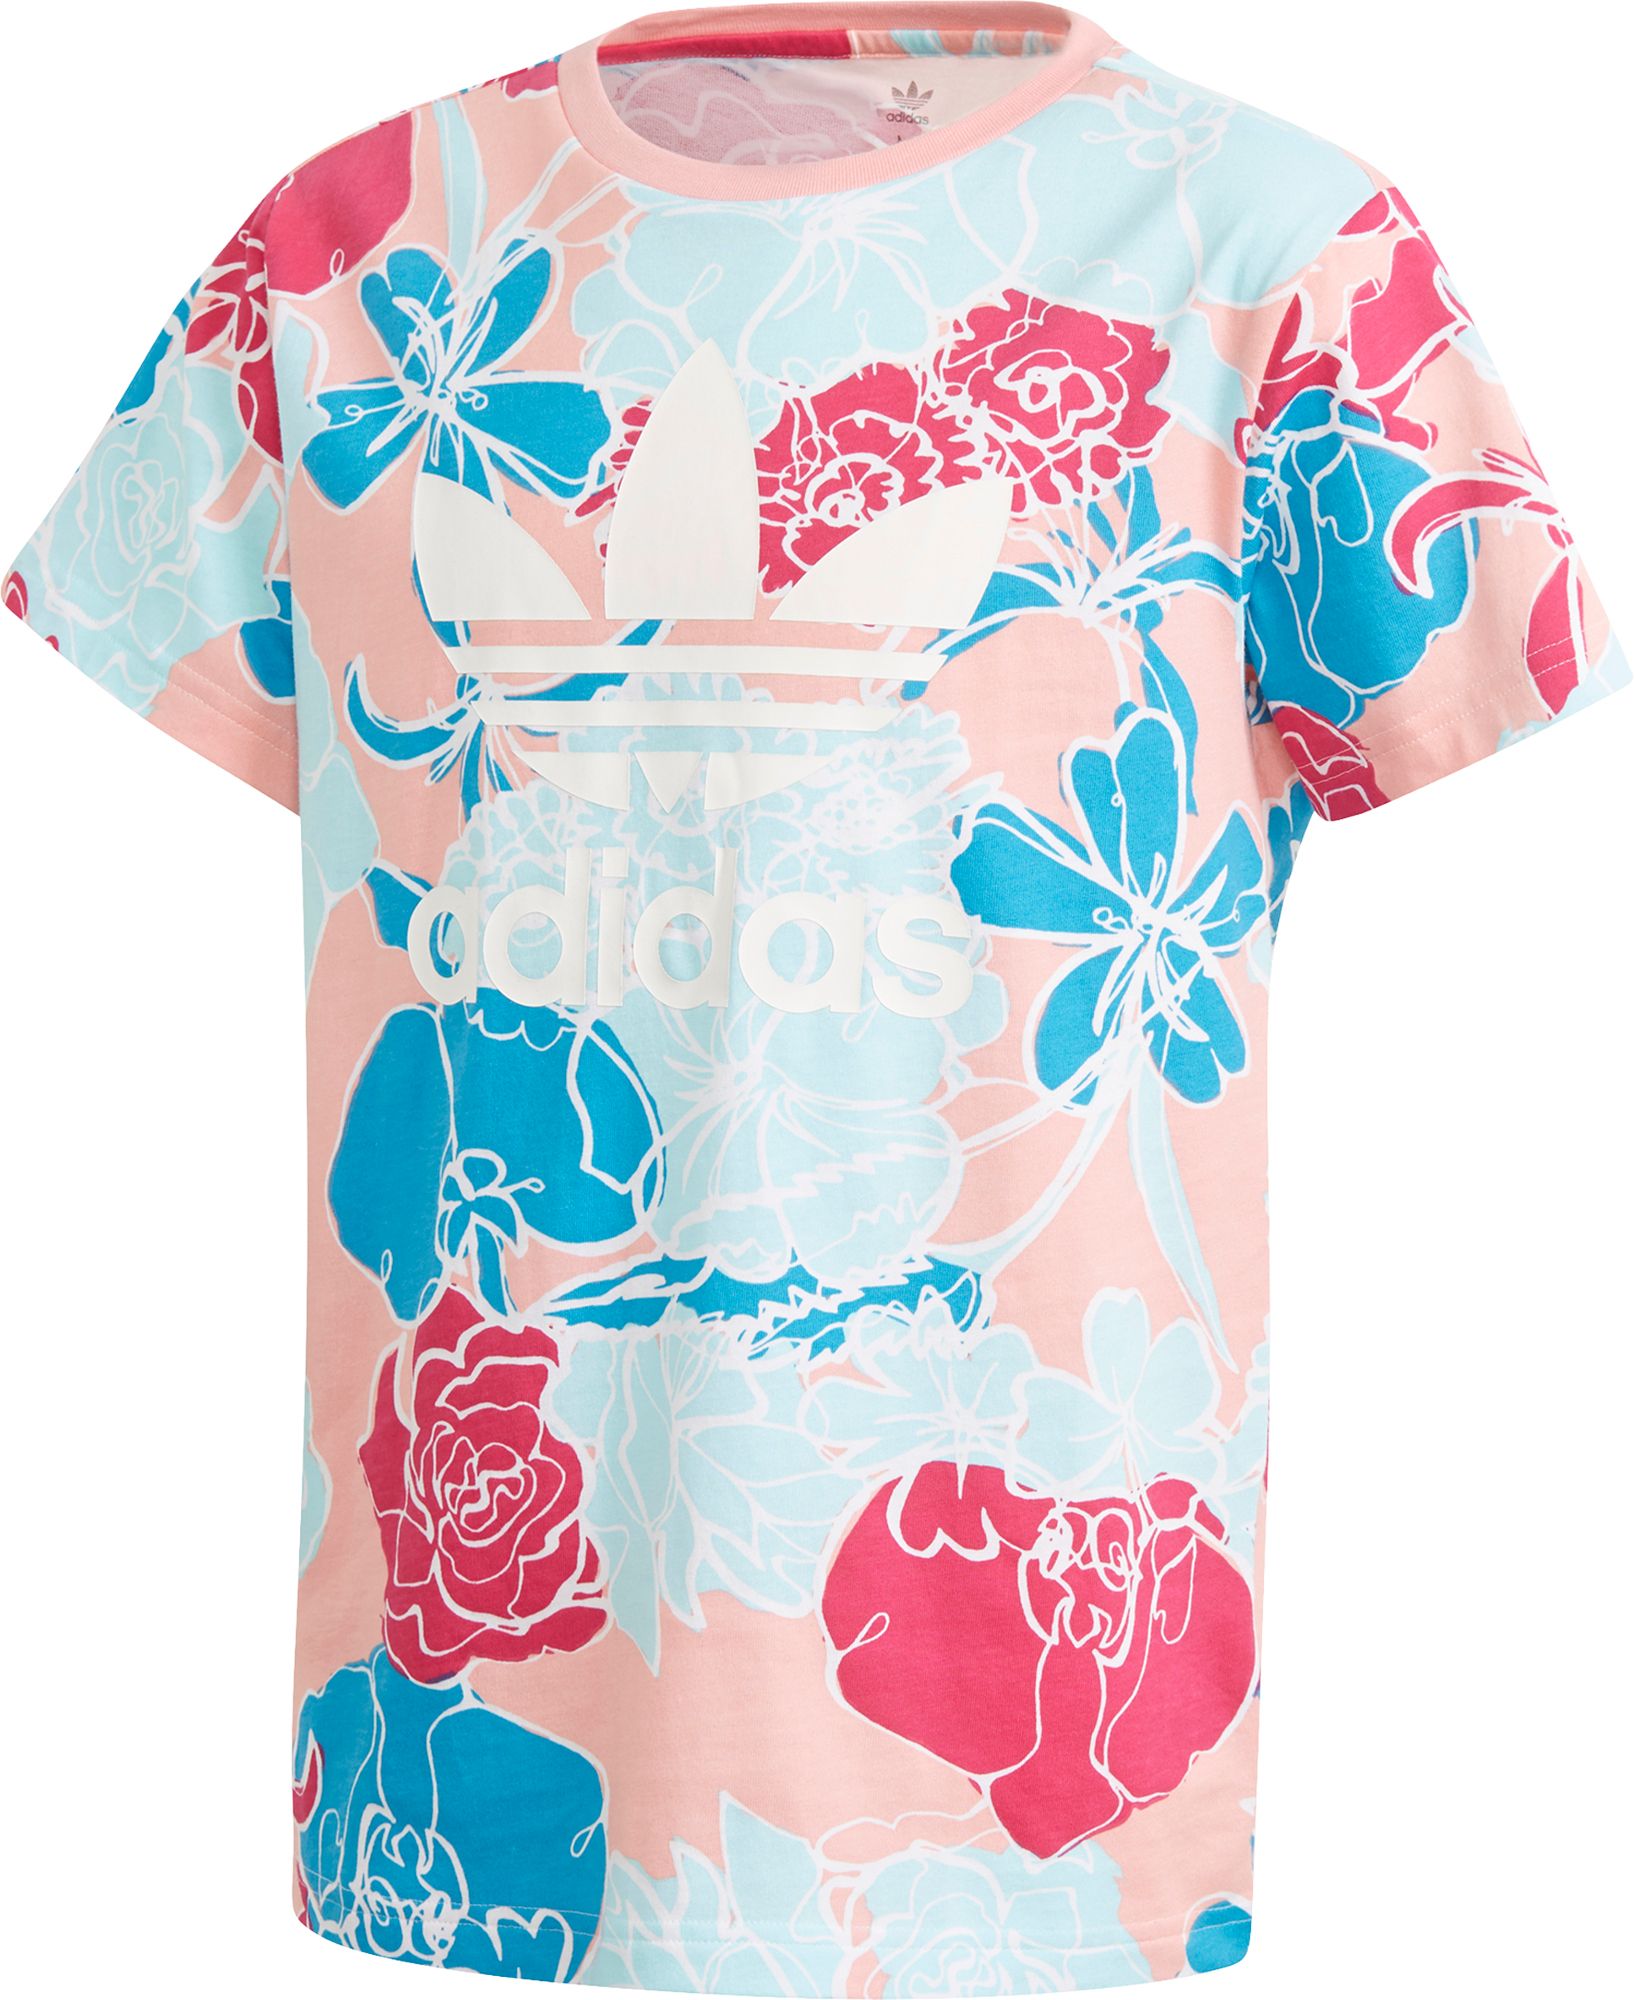 adidas floral jersey